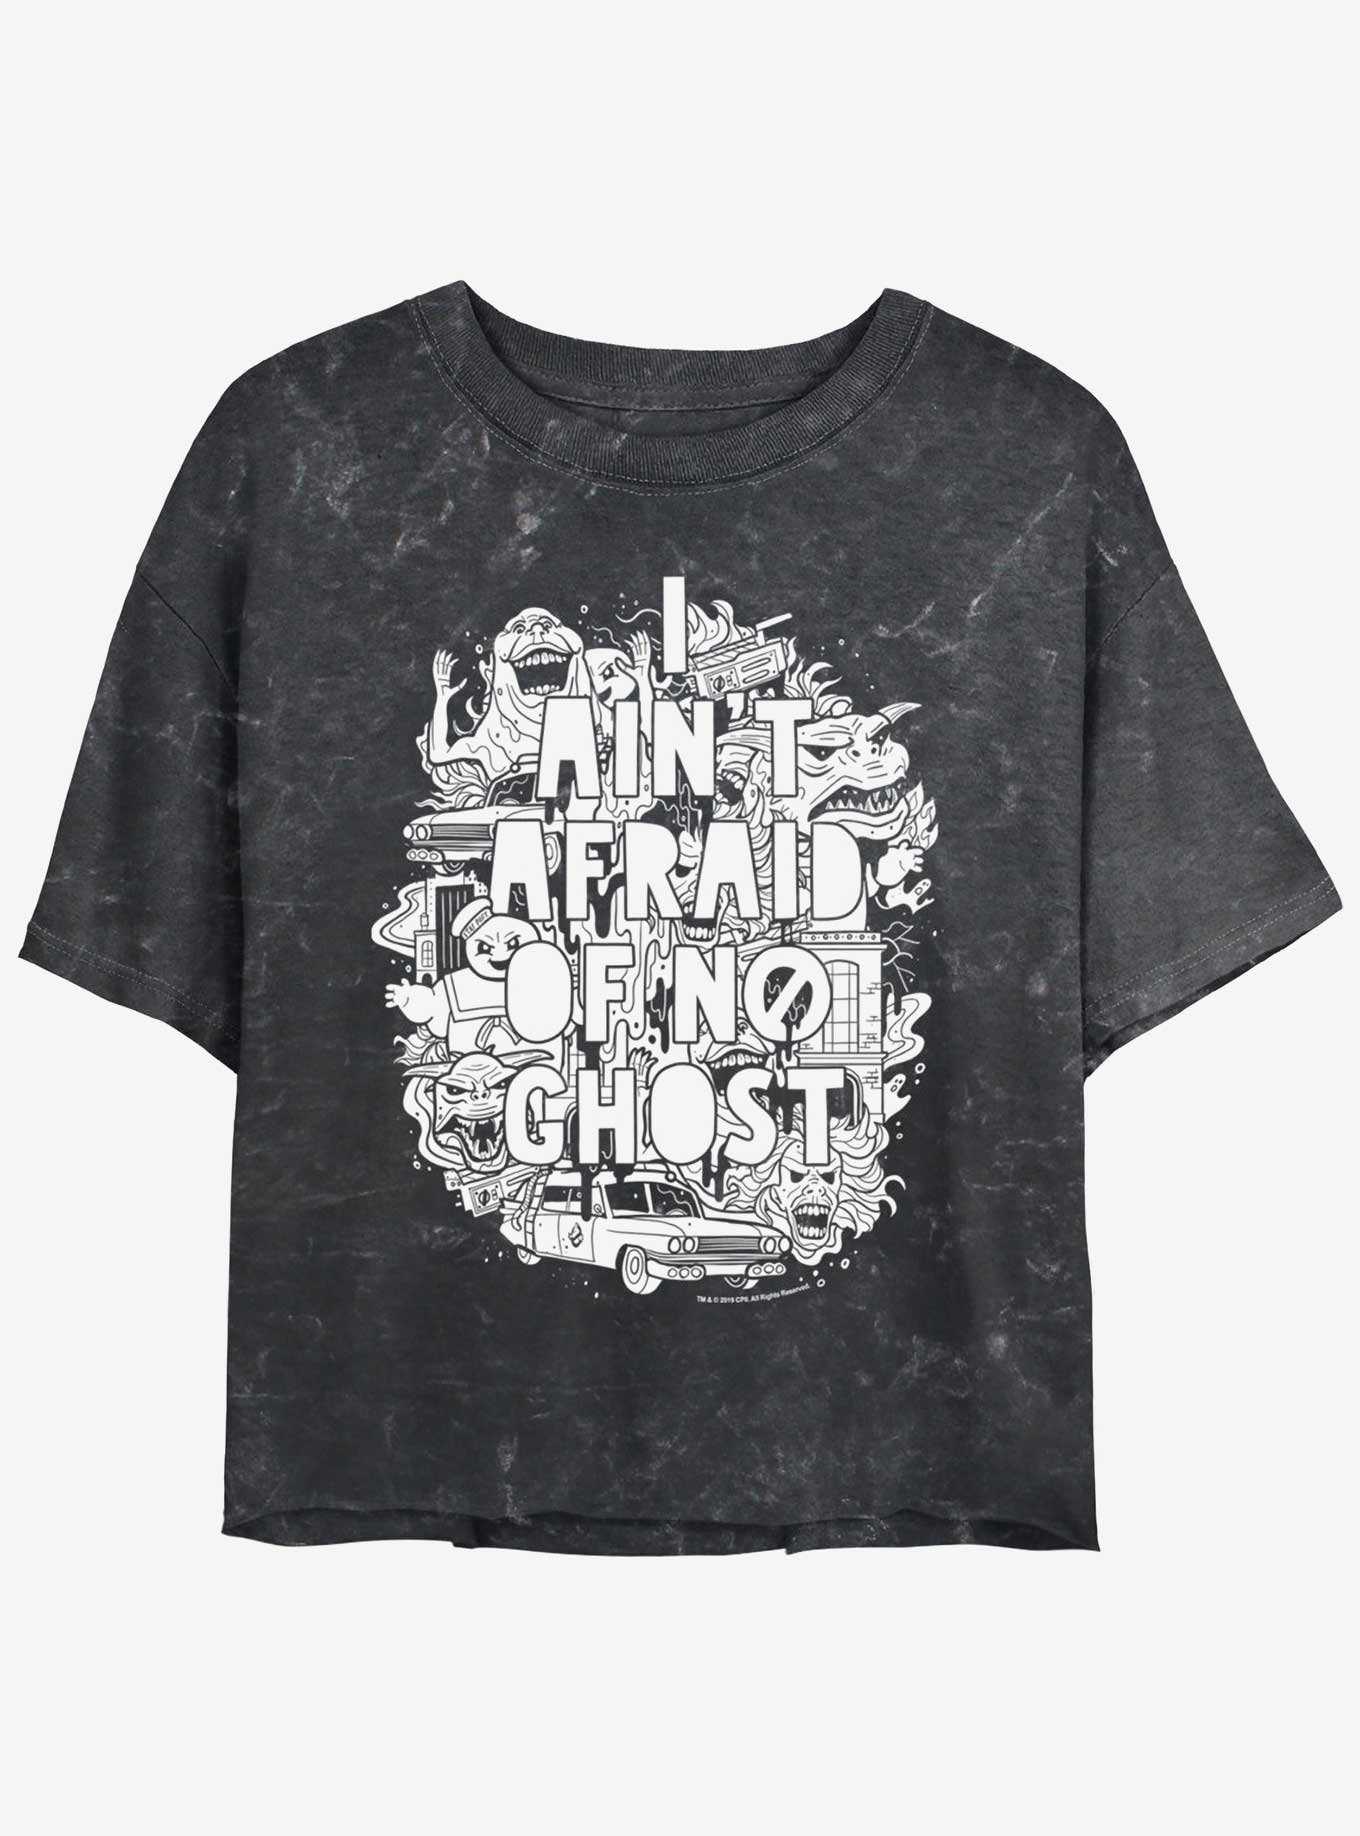 Ghostbusters Ain't Afraid Of No Ghost Womens Mineral Wash Crop T-Shirt, , hi-res